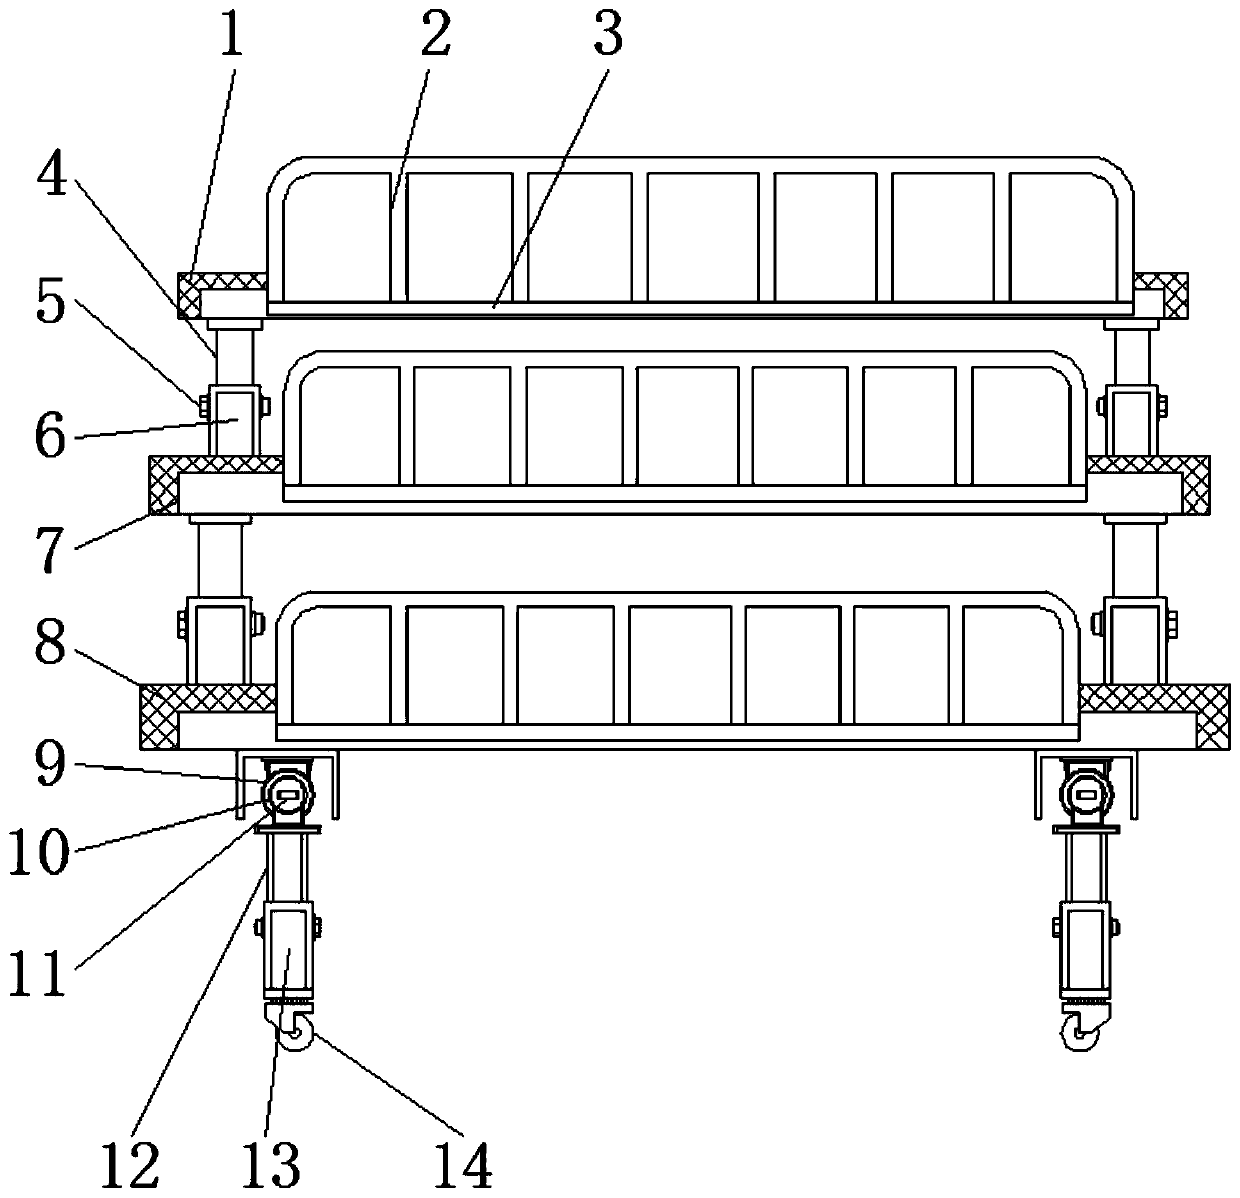 A combined logistics storage rack for storing logistics packages